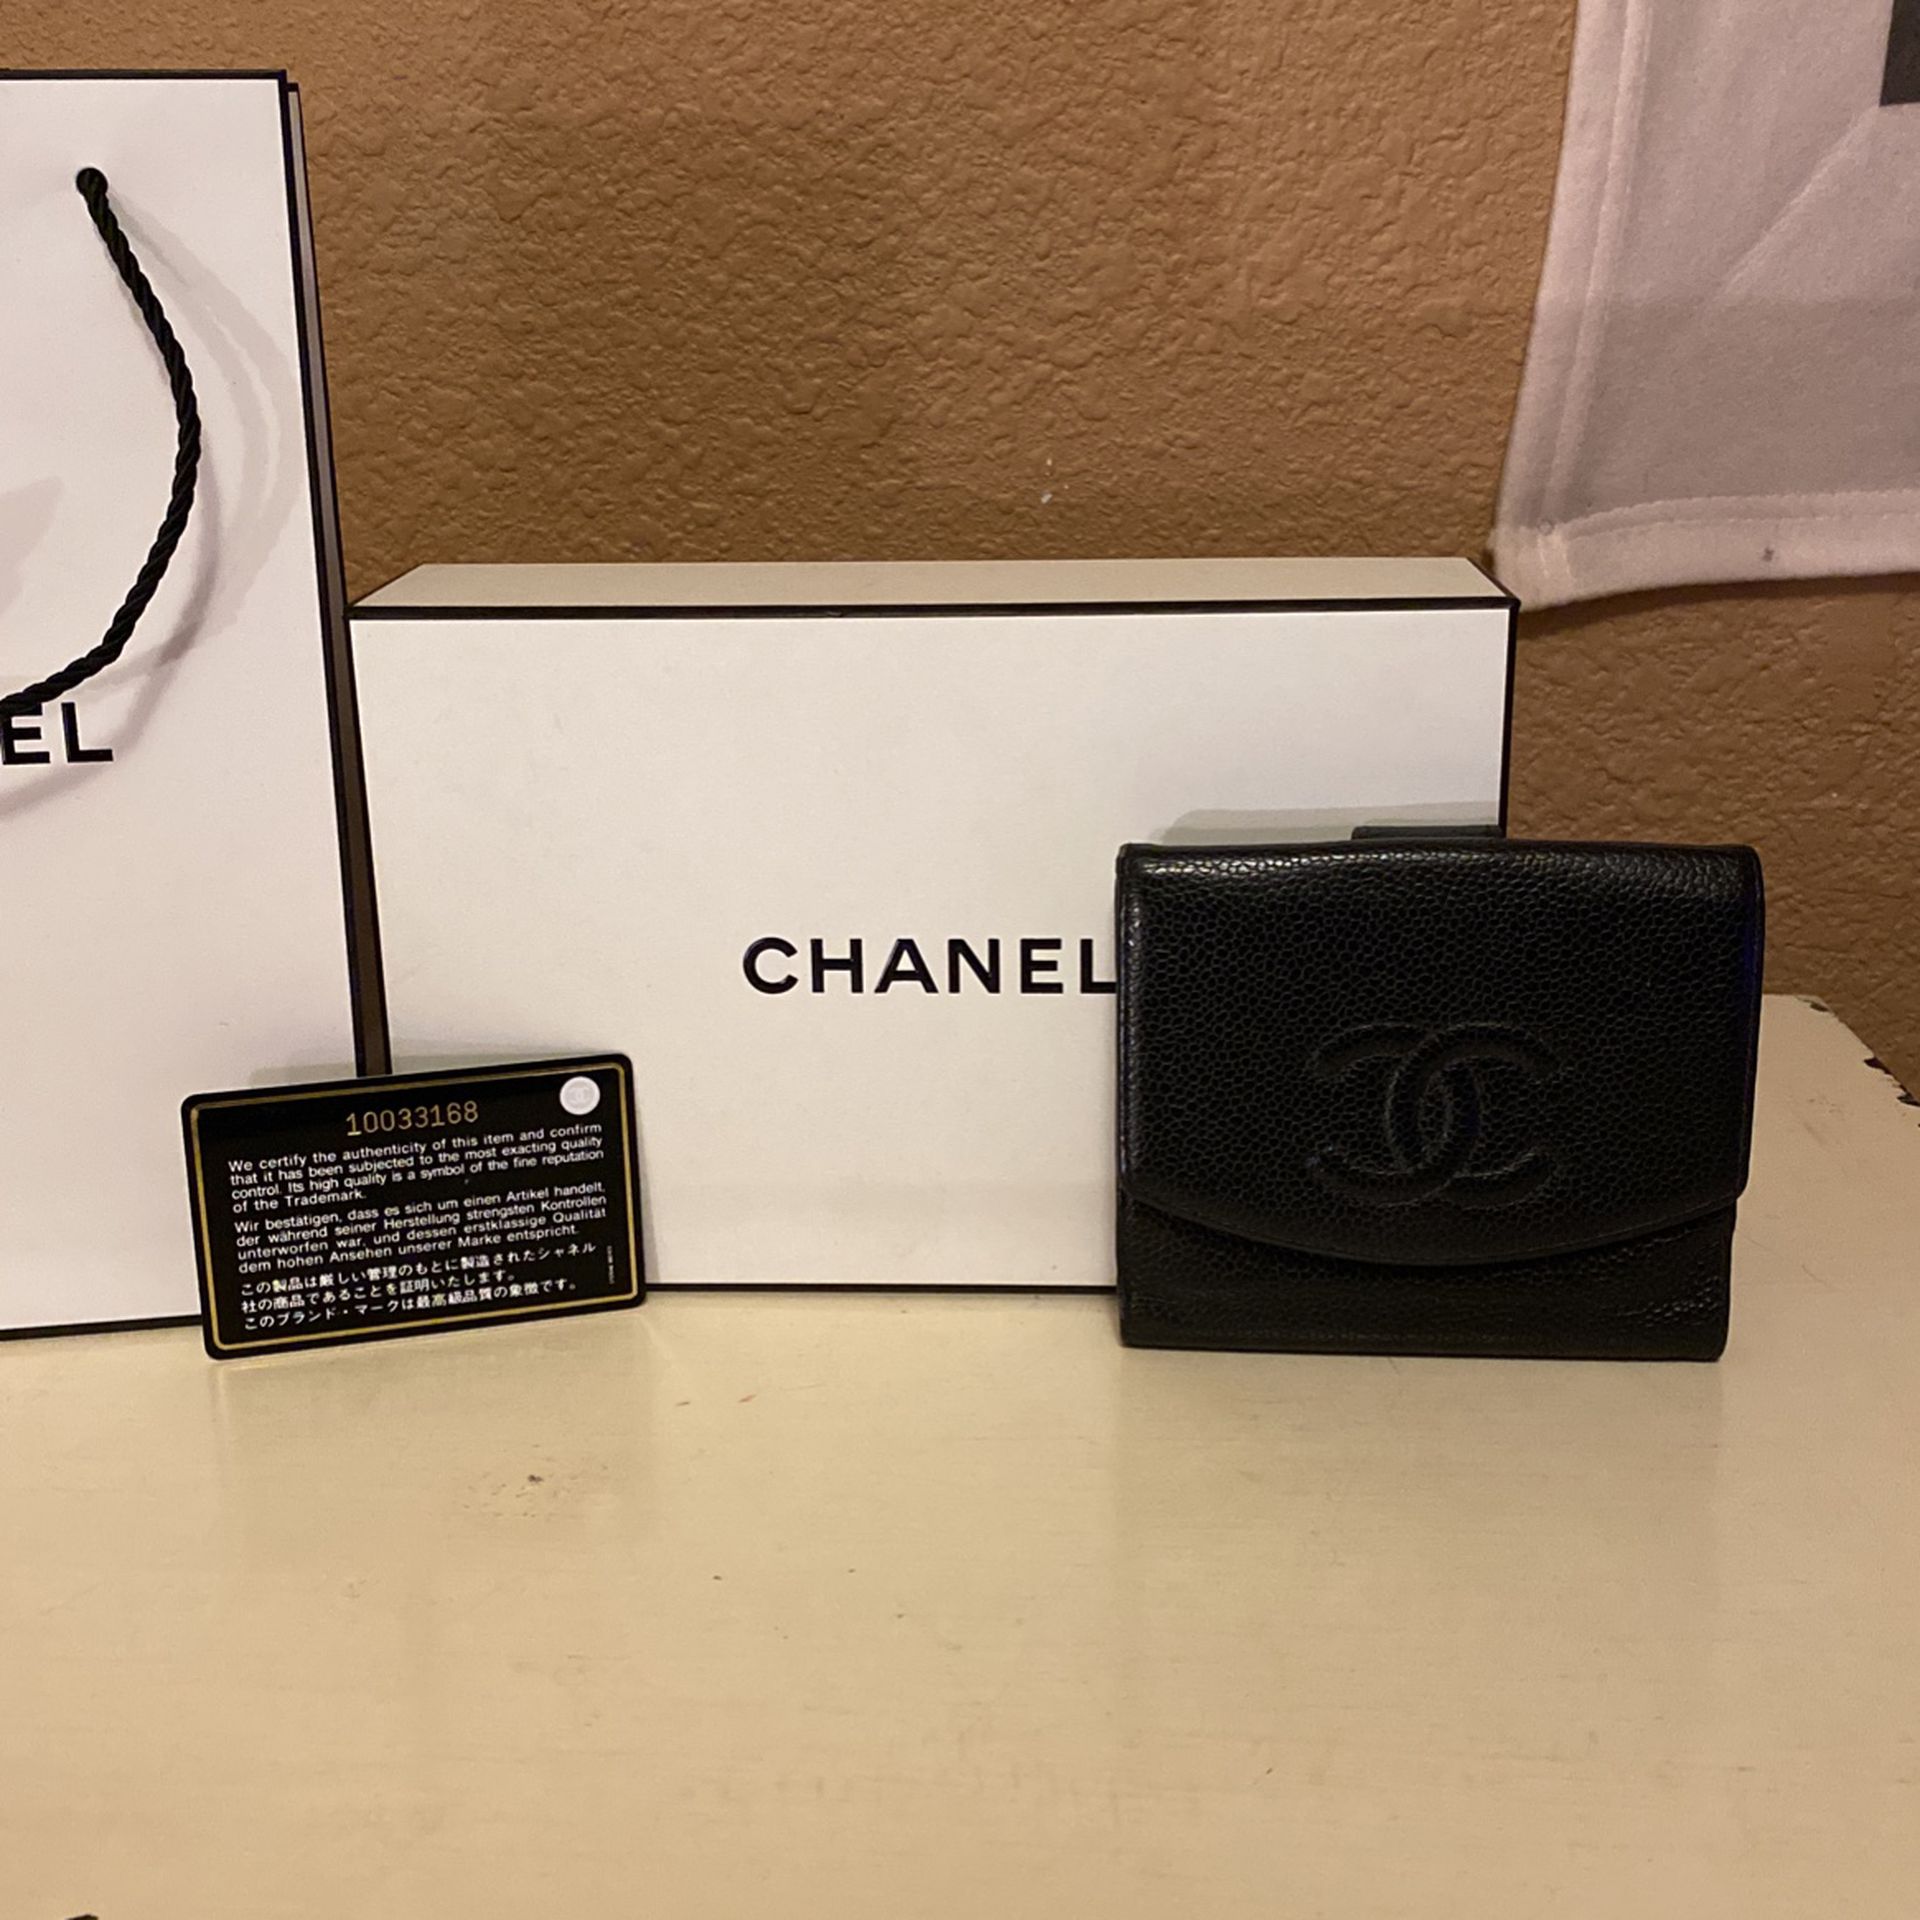 Chanel Authentic New Womens Cc Logo Black Caviar Skin Leather Bifold Wallet With Serial Number Seal And Authenticity Card $300 Obo C My Other Items 